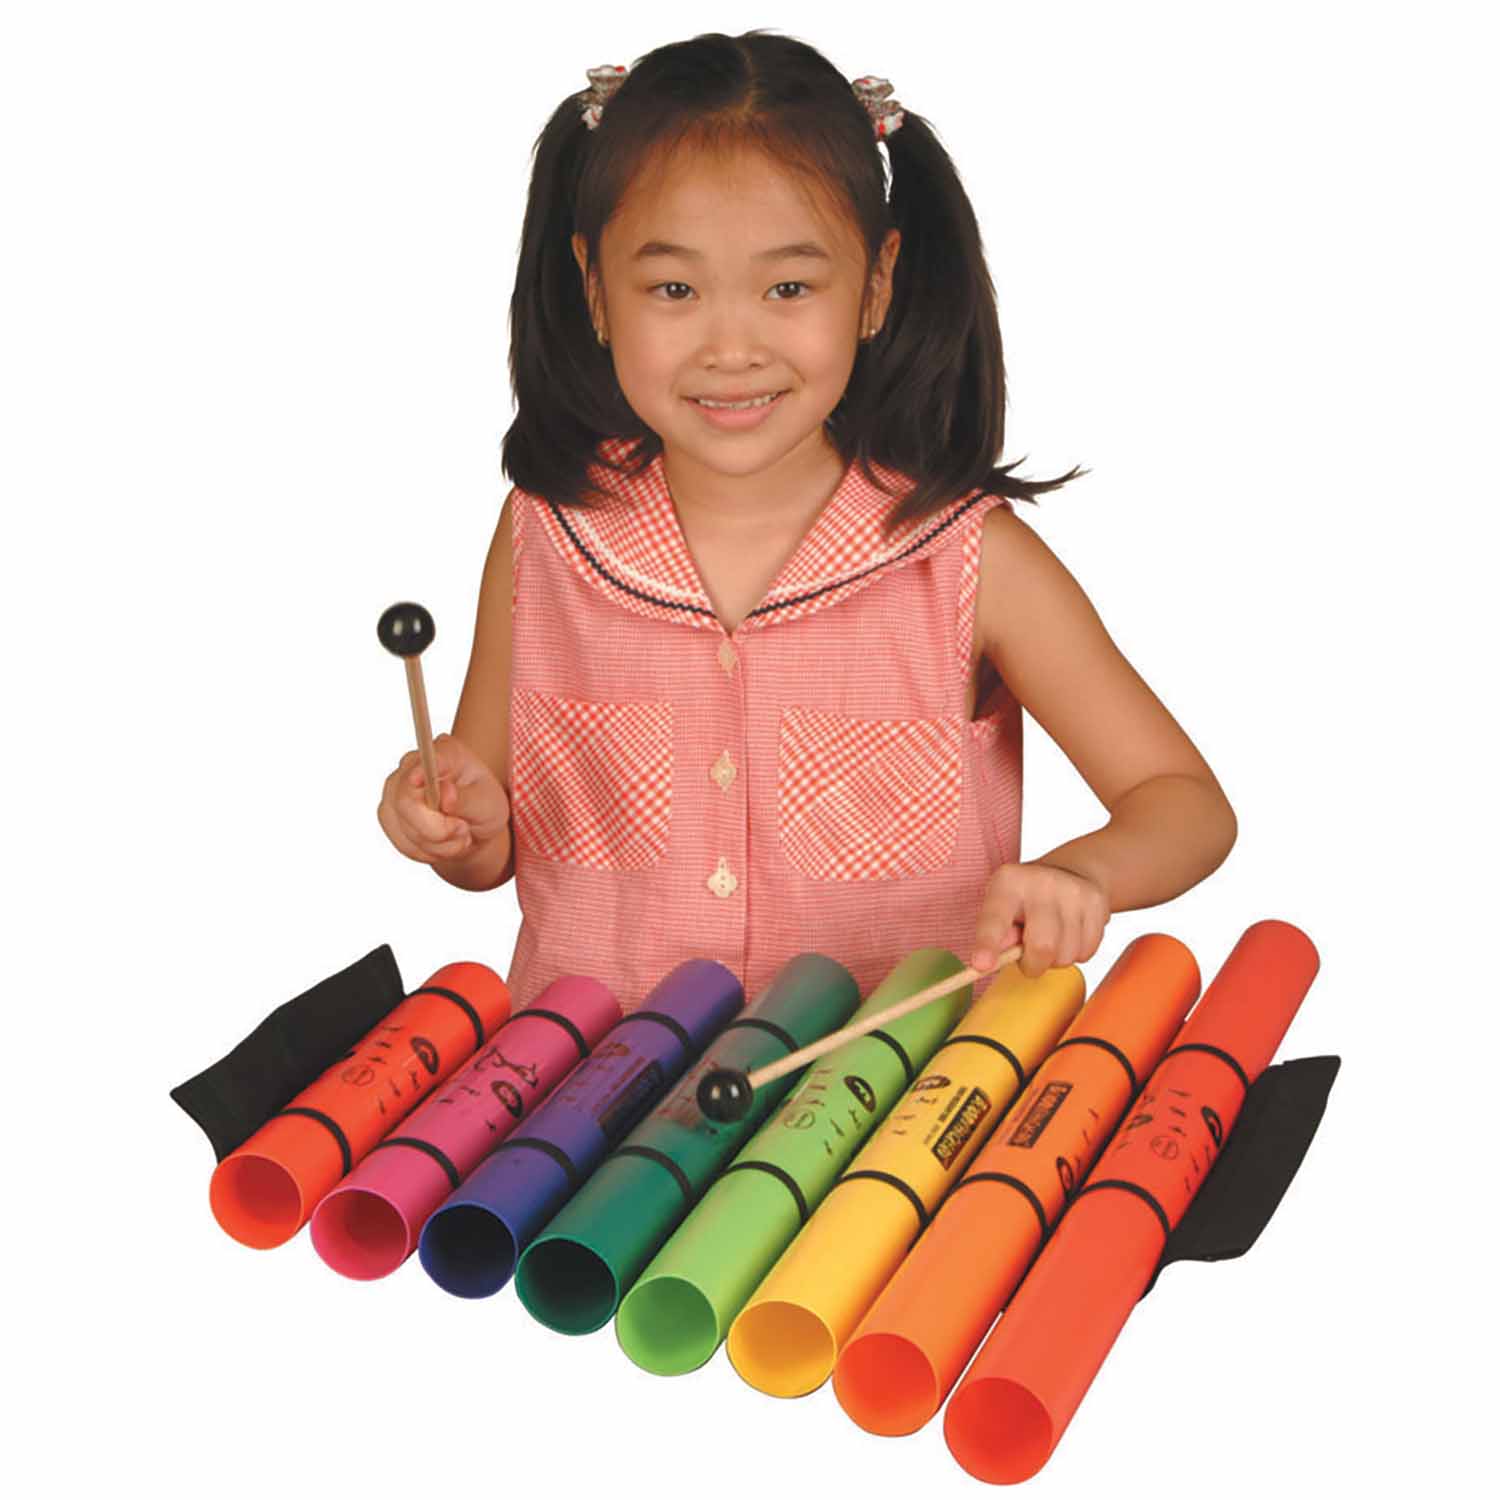 Boomwhackers® Boomophone™ XTS Whack Pack